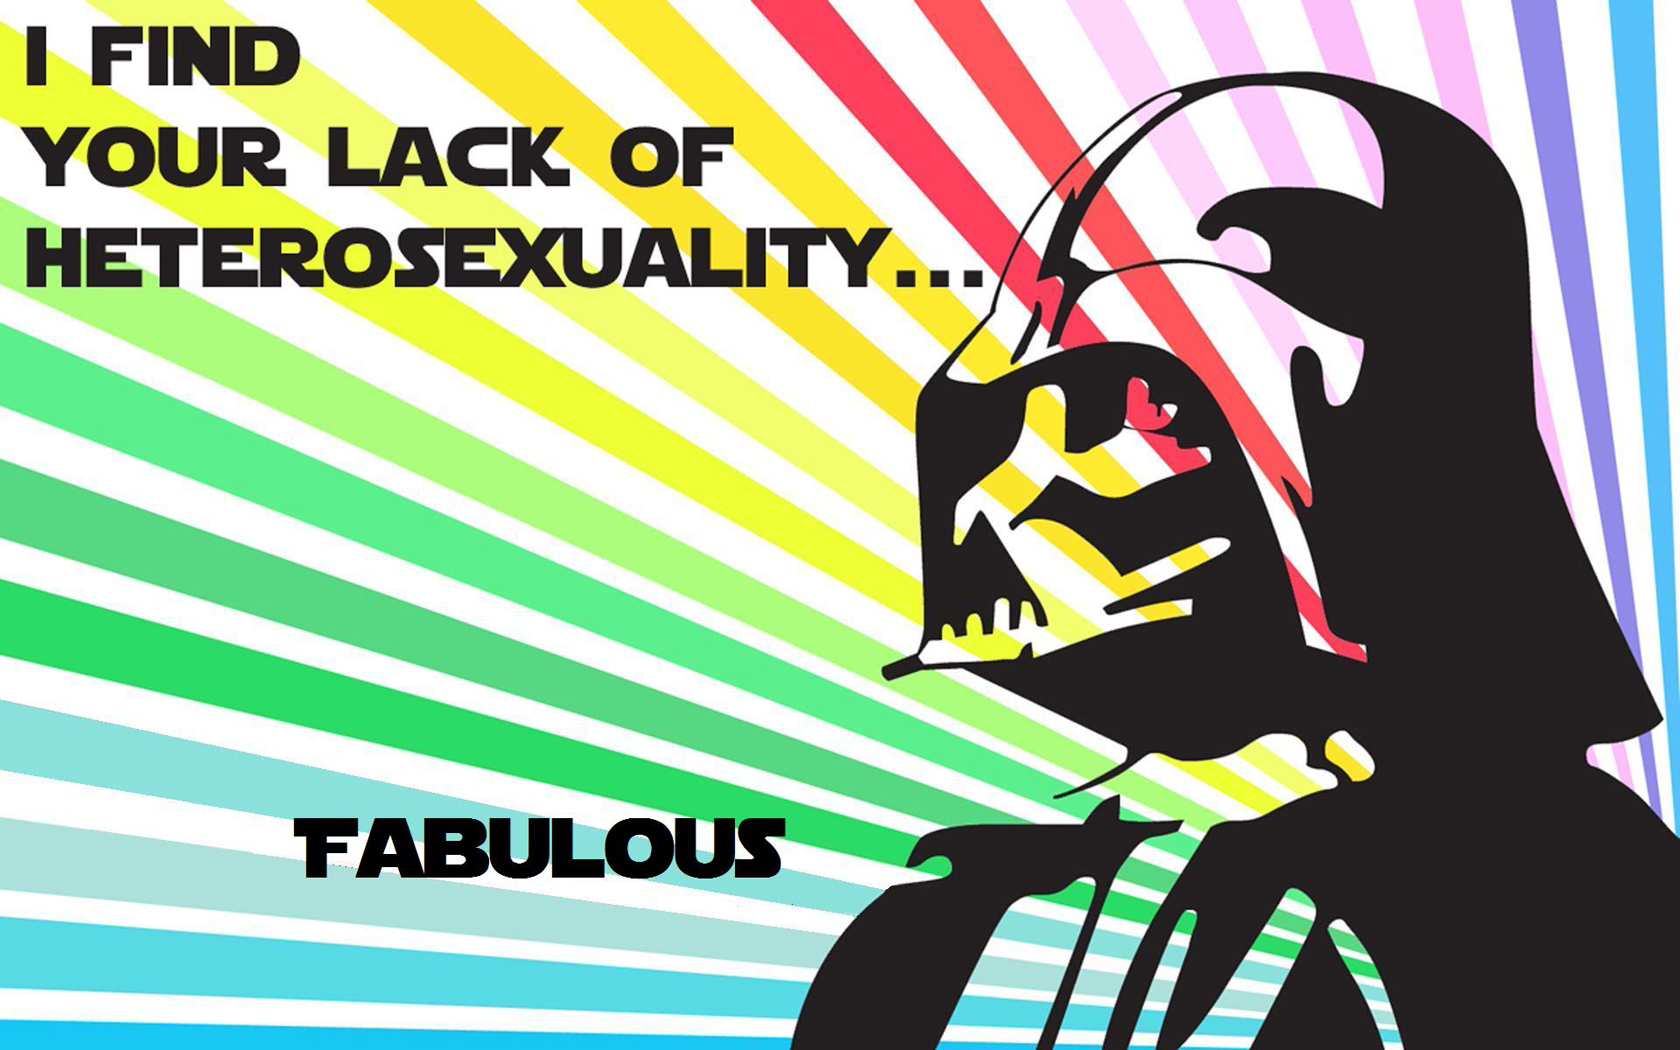 i find your lack of hetrosexuality – fabulous